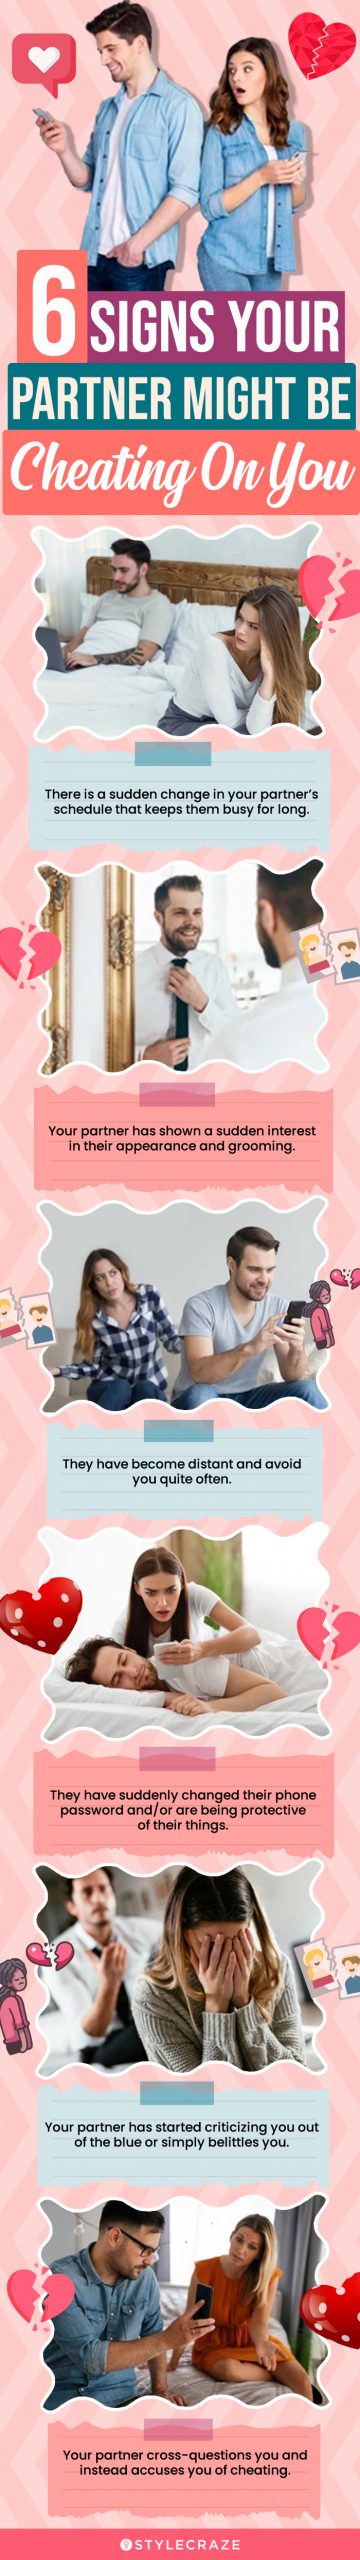 6 signs your partner might be cheating on you (infographic)